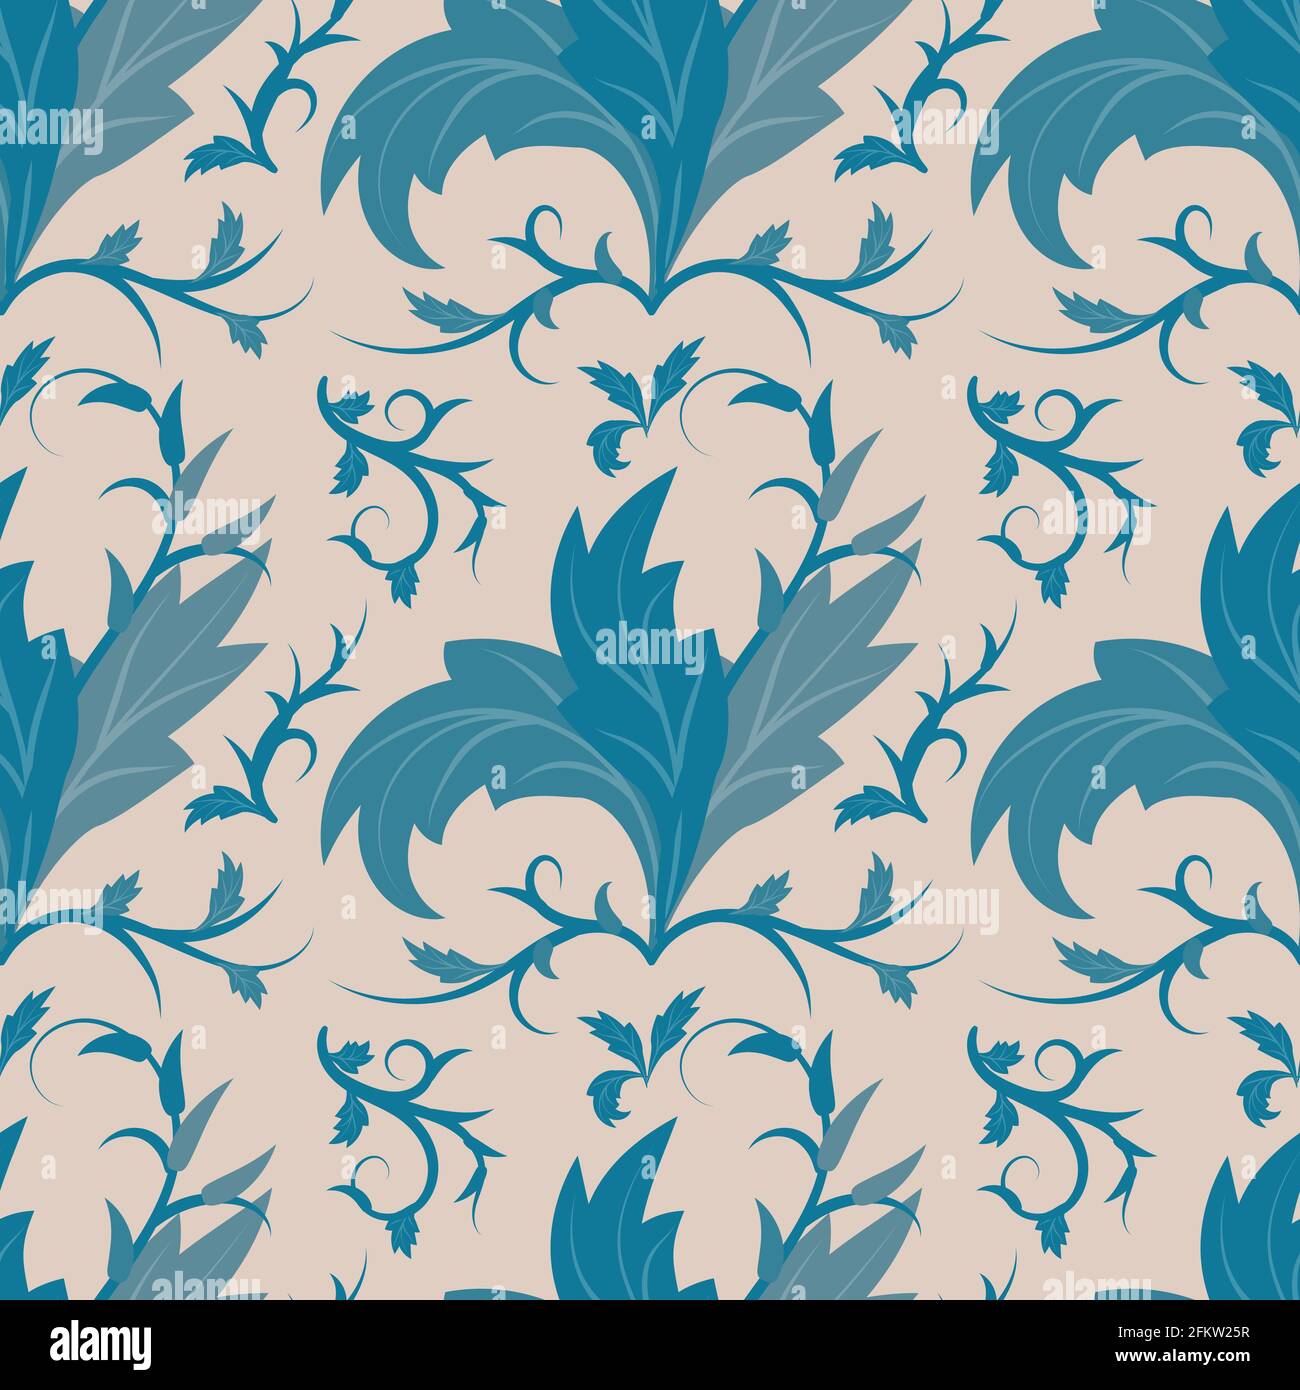 Seamless pattern in Art Nouveau style. Petals, leaves, swirls and lines in monochrome dark blue on neutral beige background. Vector illustration for p Stock Vector